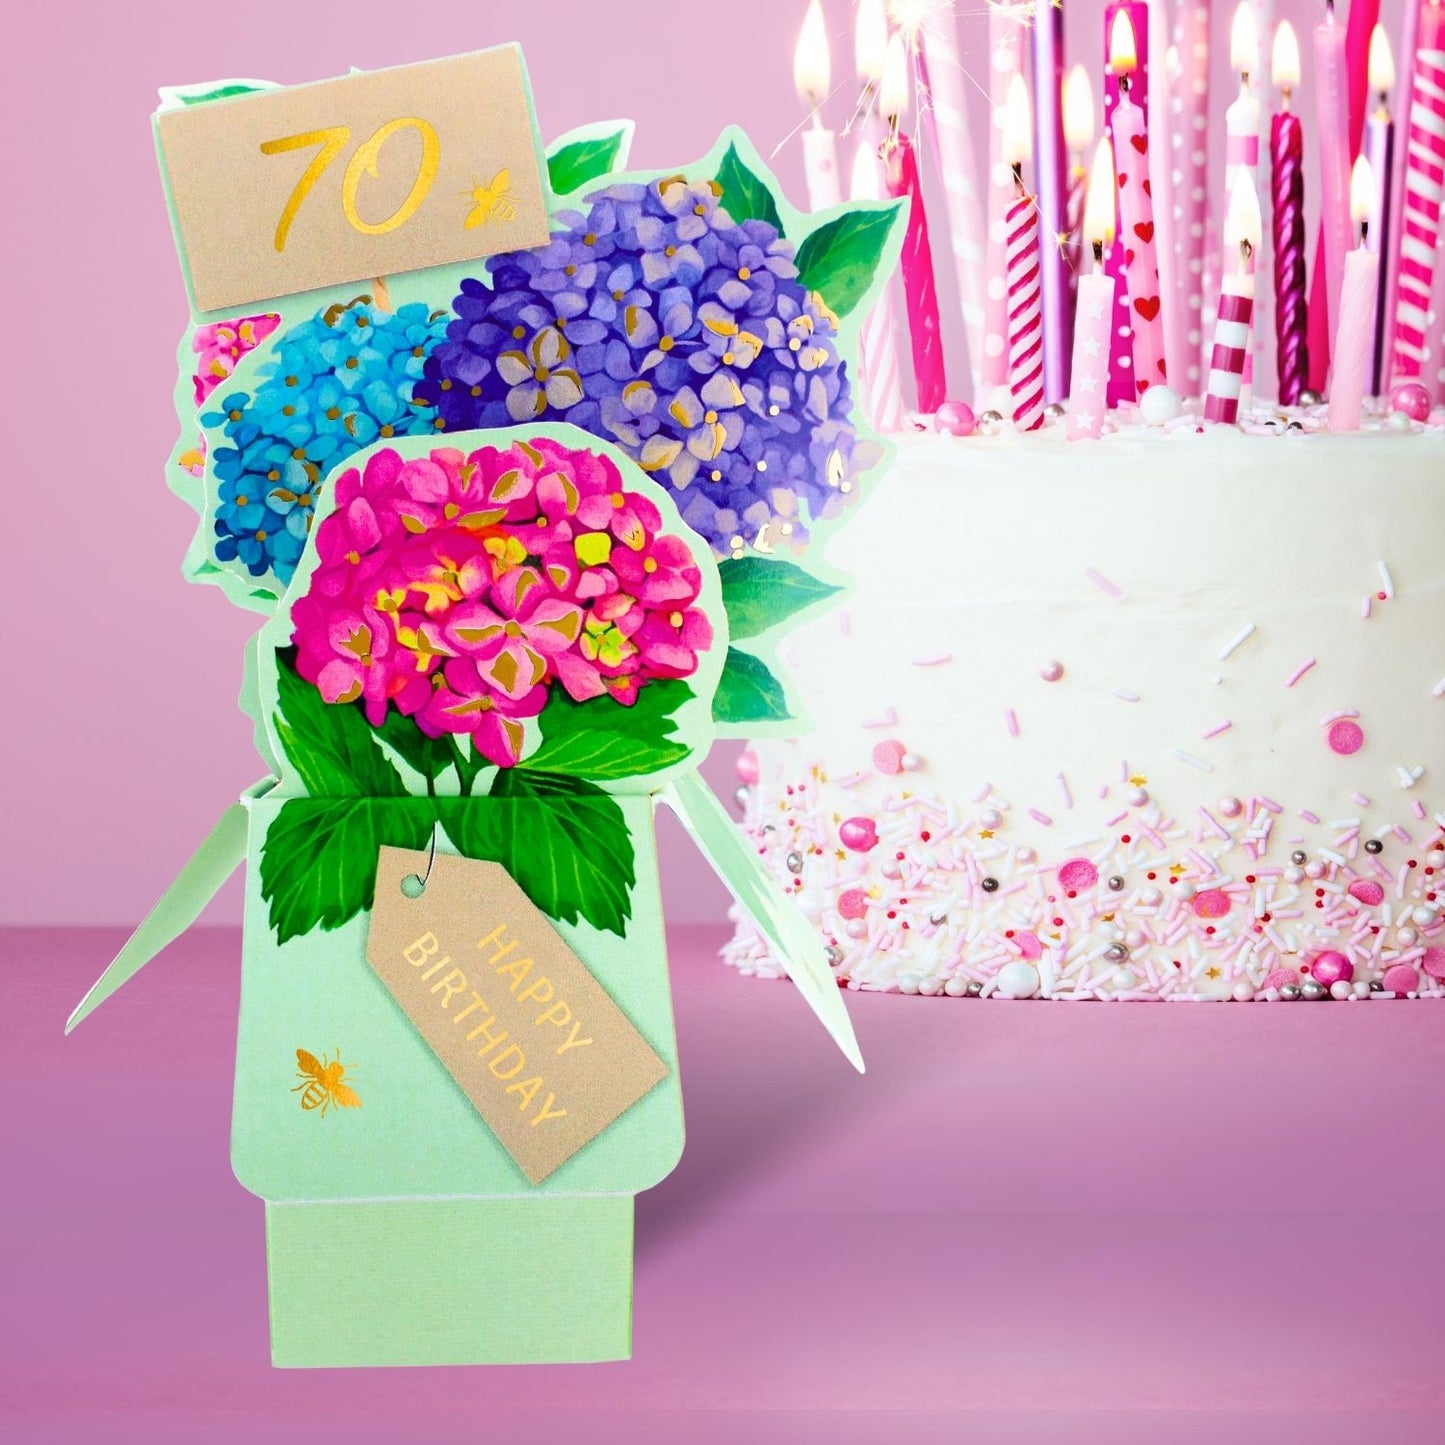 Clever Cube 70th Birthday For Her Happy 70th! Birthday Pop Up Greeting Card